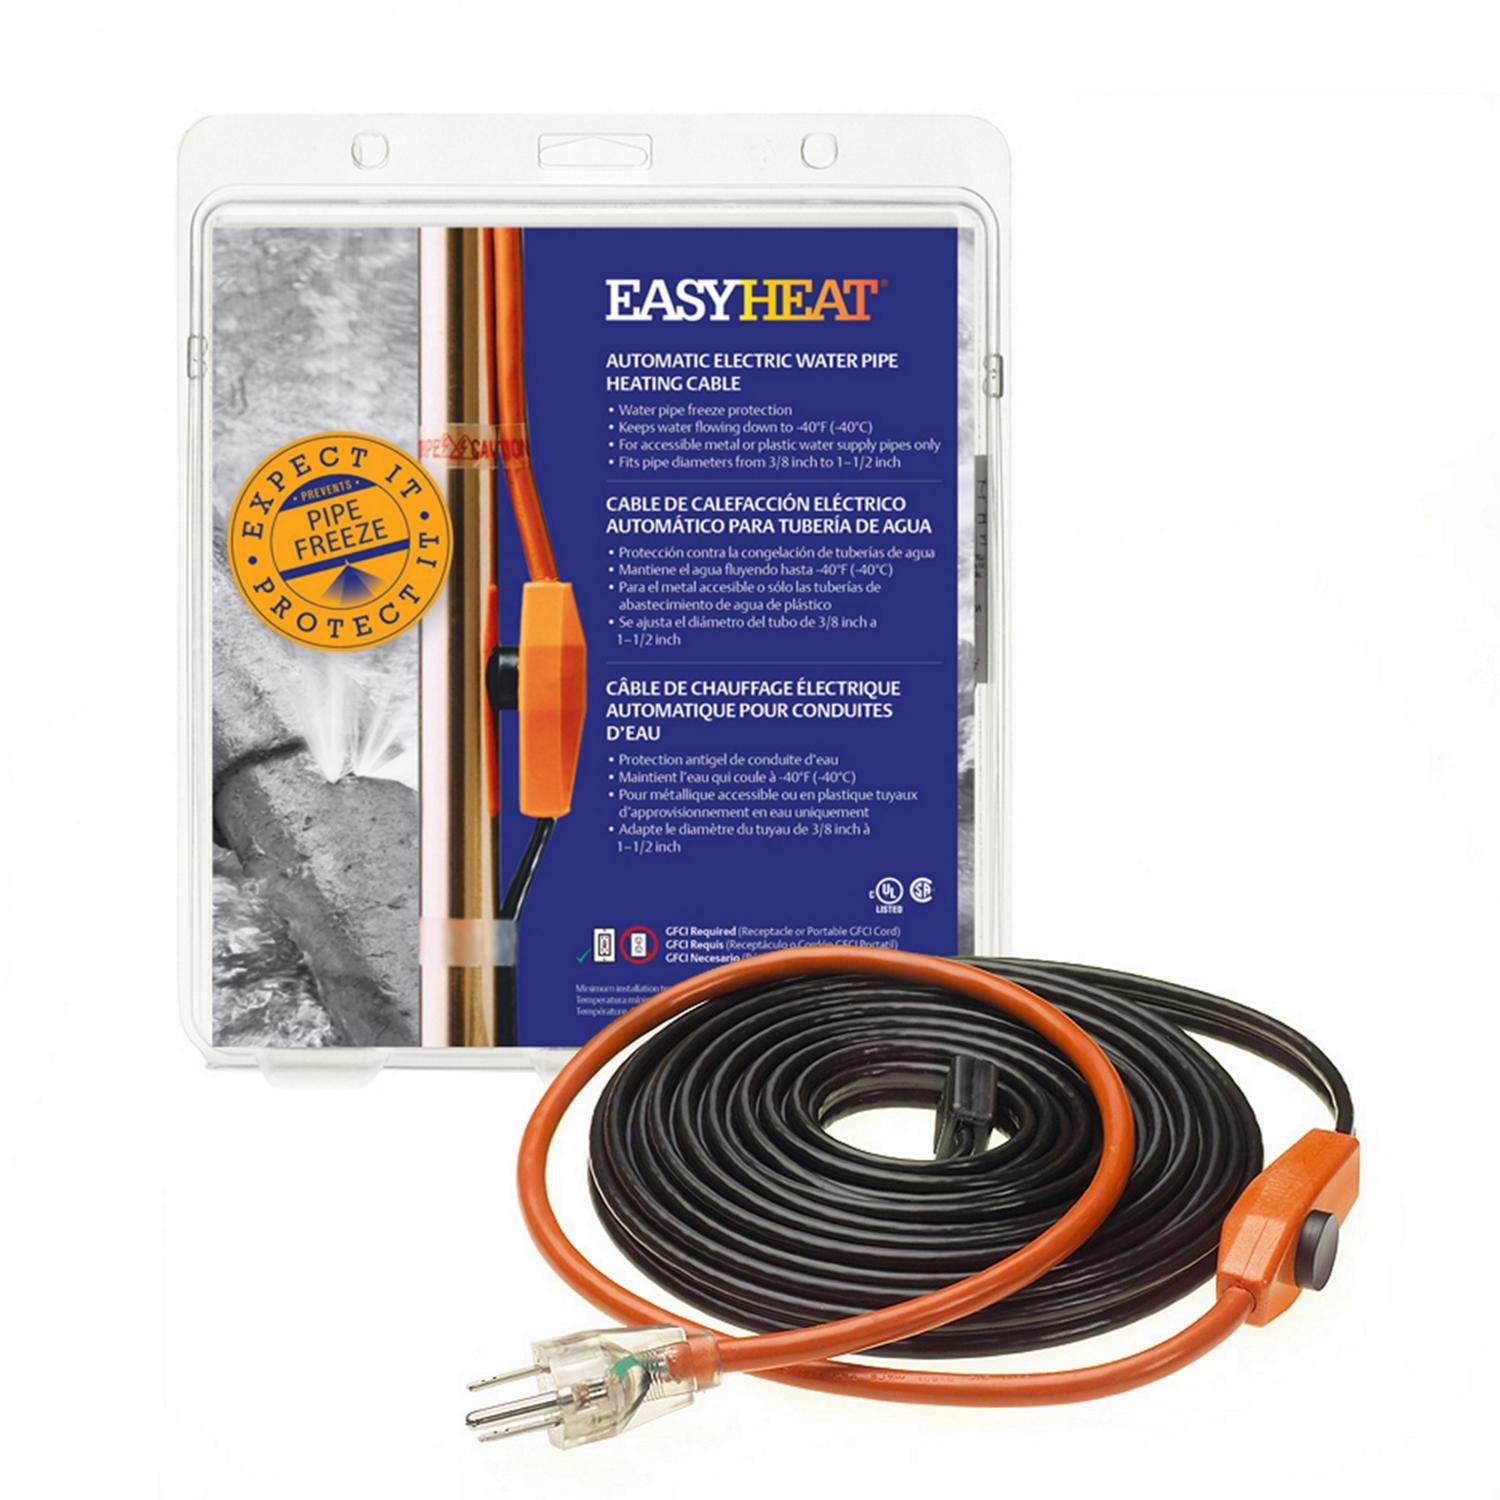 Easy Heat Automatic Soil Heating Cable 6 ft 120v 21w Plant Growth Gray NOS 